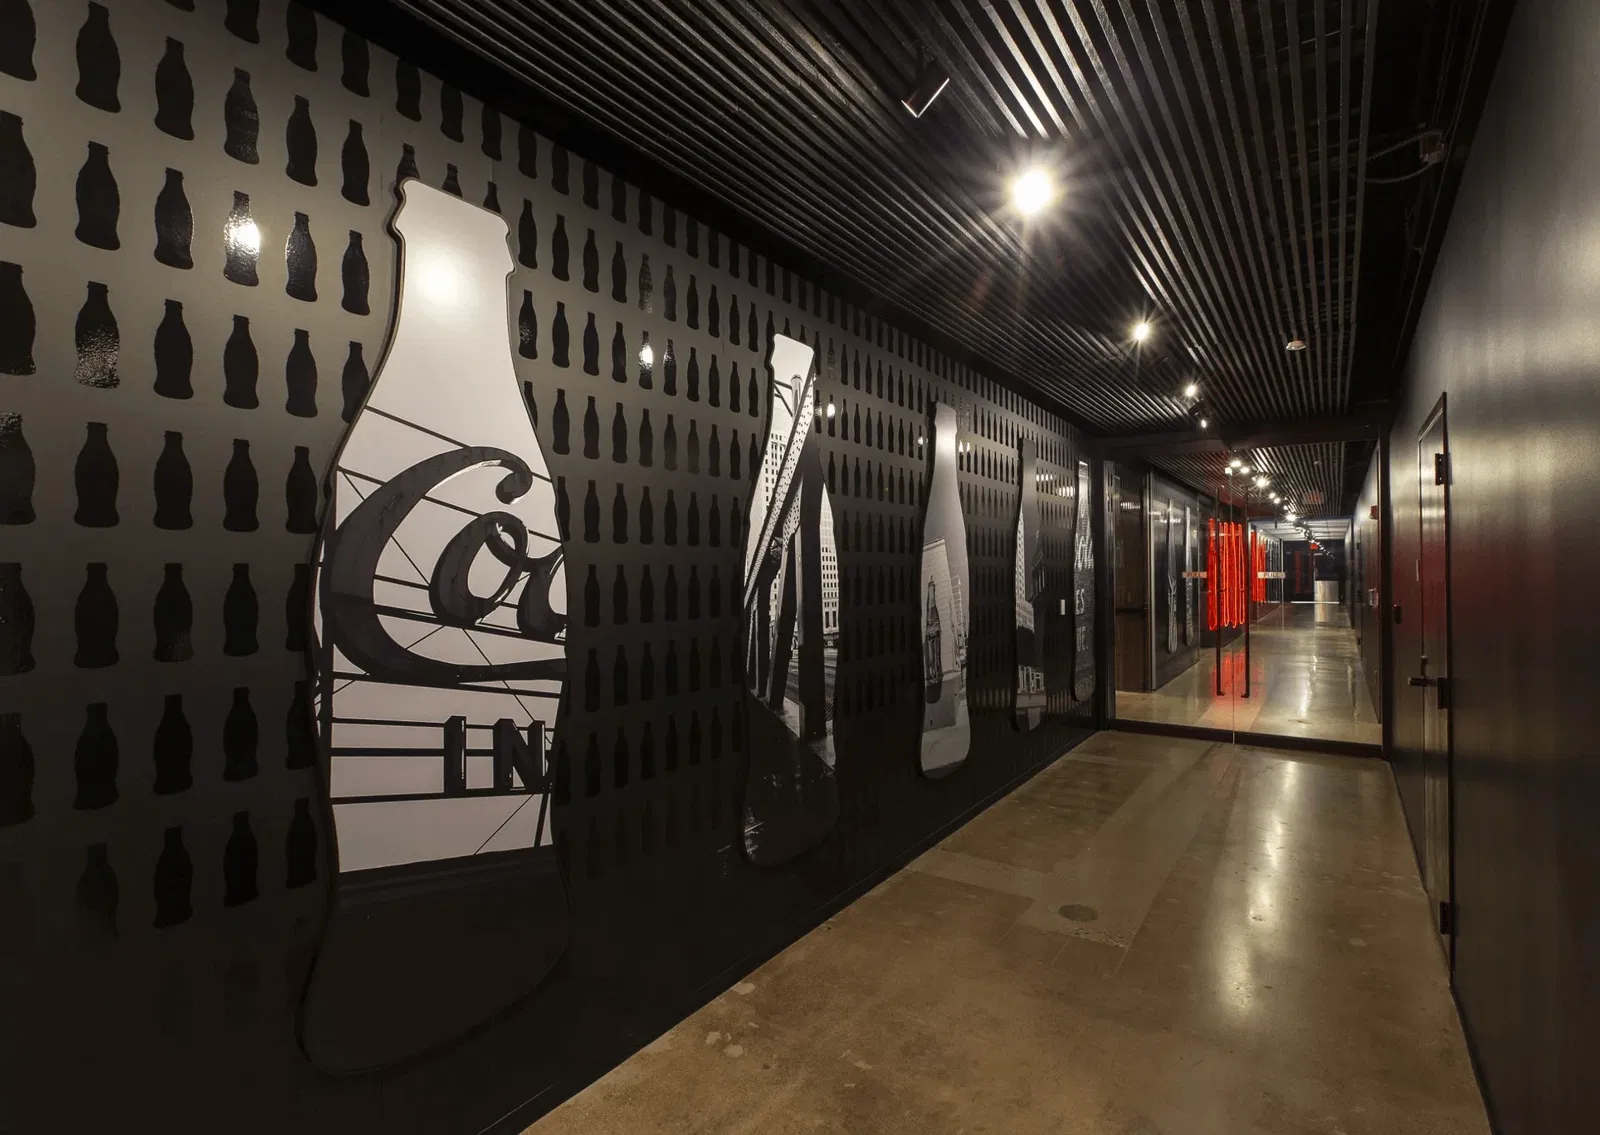 Black stylish corridor at the Niles facility, with Coca-Cola bottle-like images across the wall